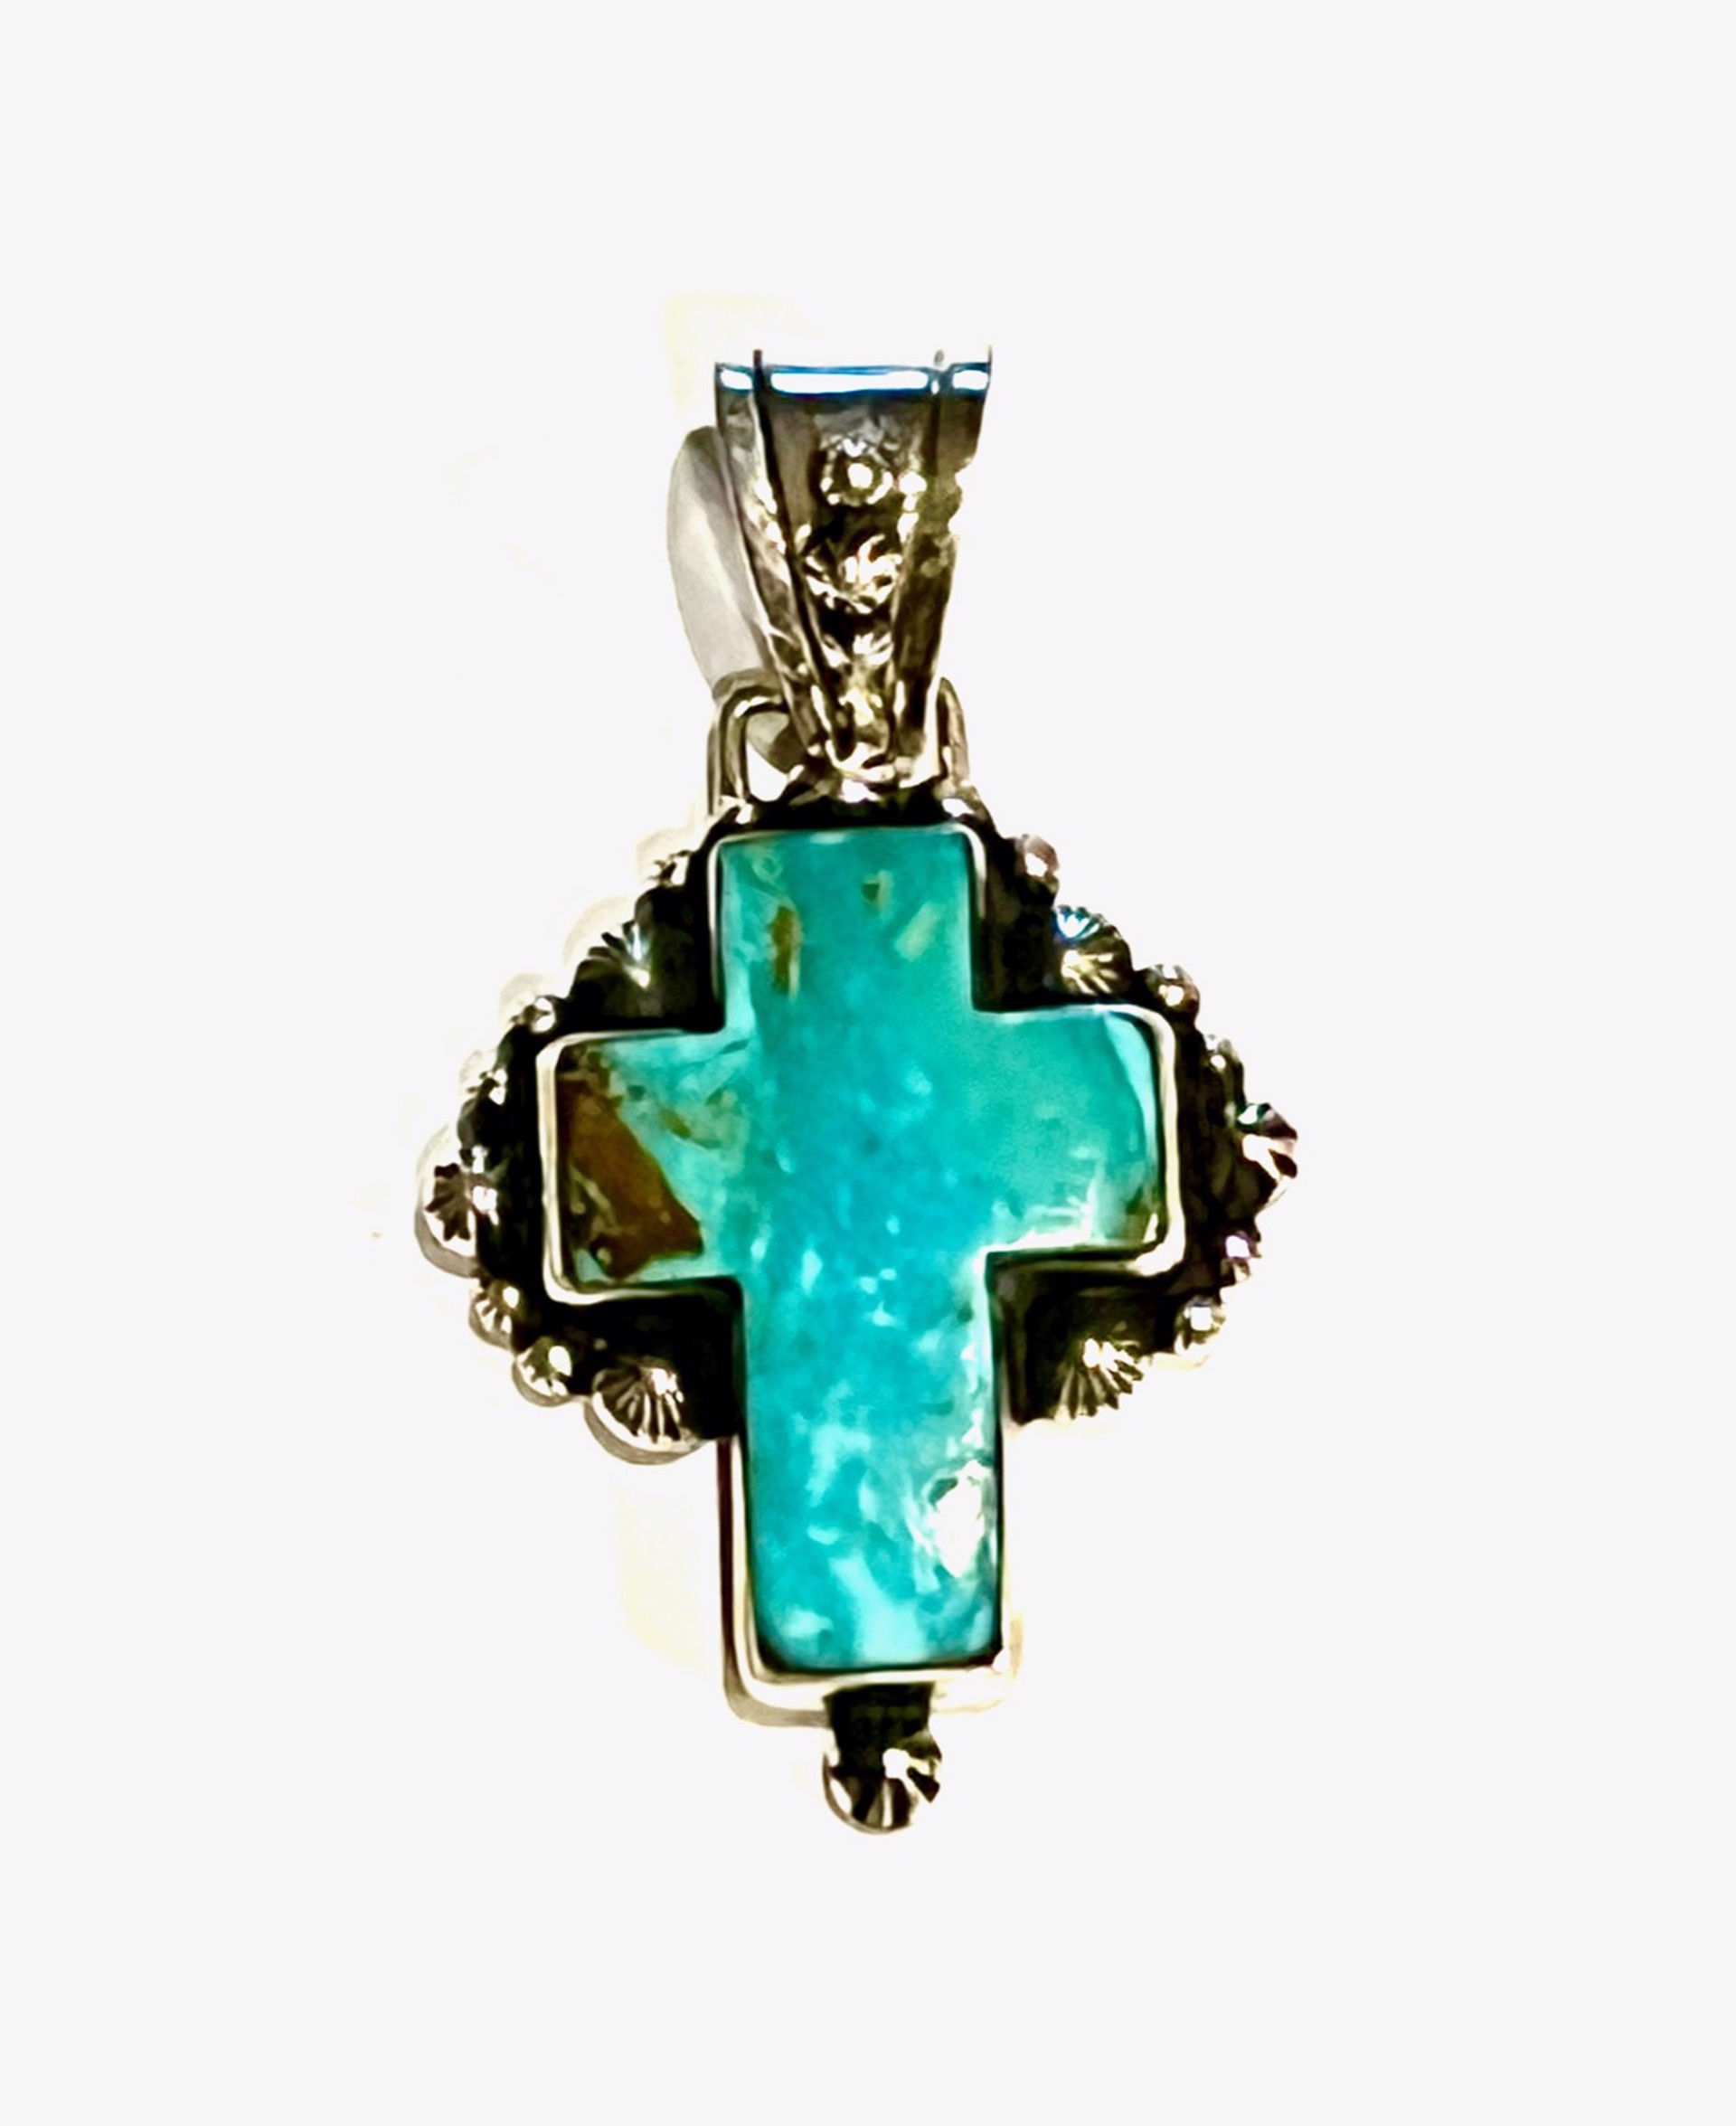 Pendant - Kingman Turquoise Cross with Silver Surround by Dan Dodson